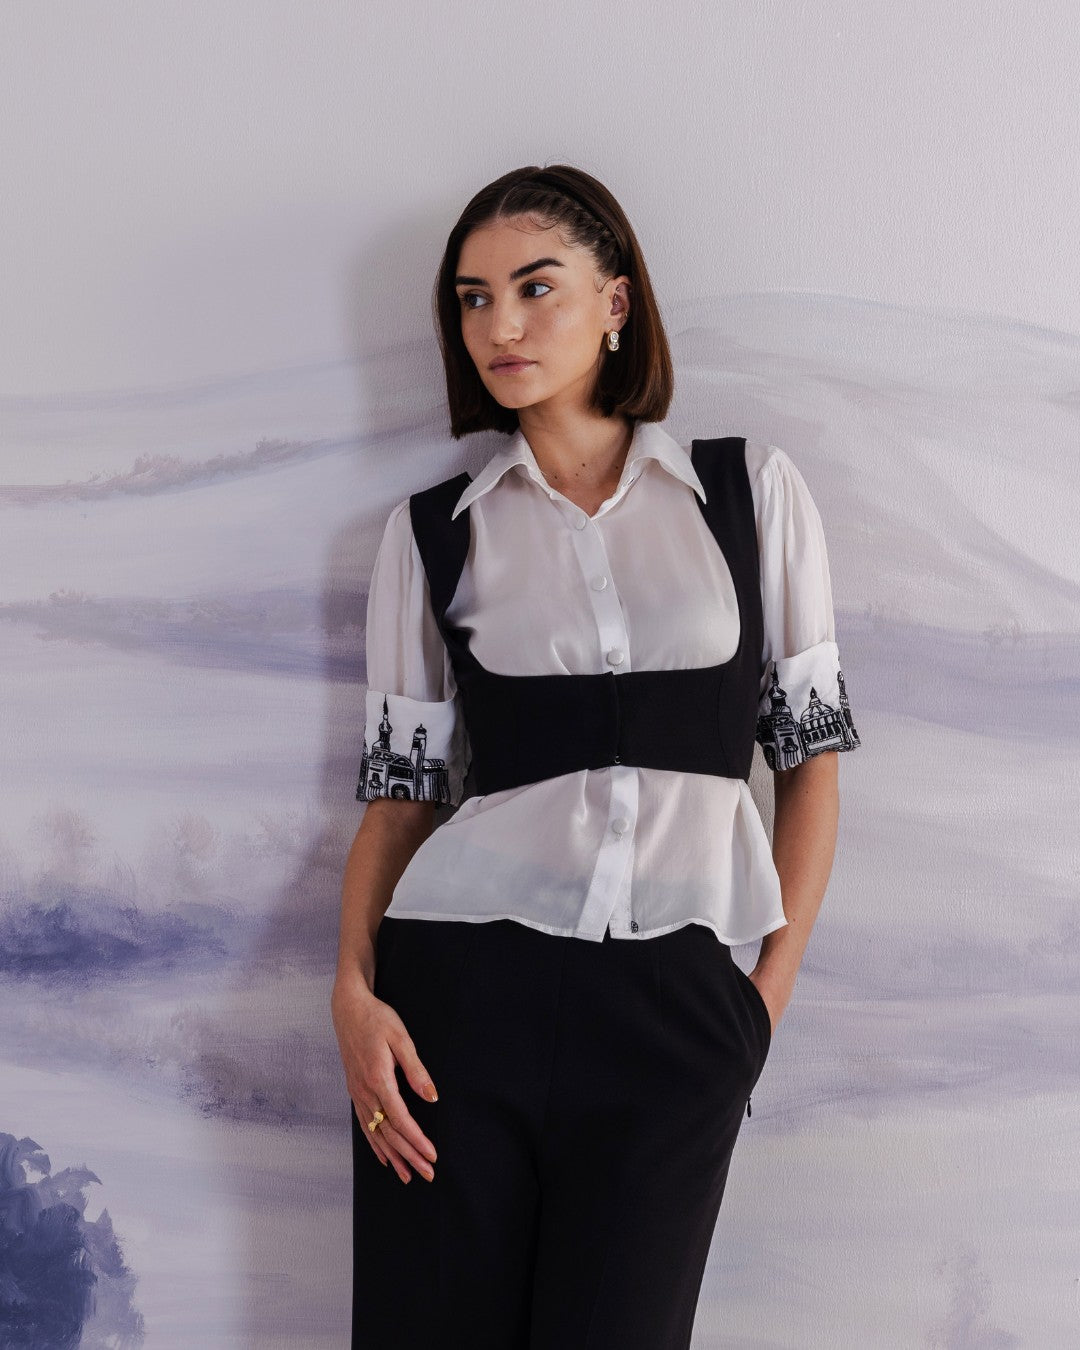 The Greece Ensemble Embroidered Cuff Shirt